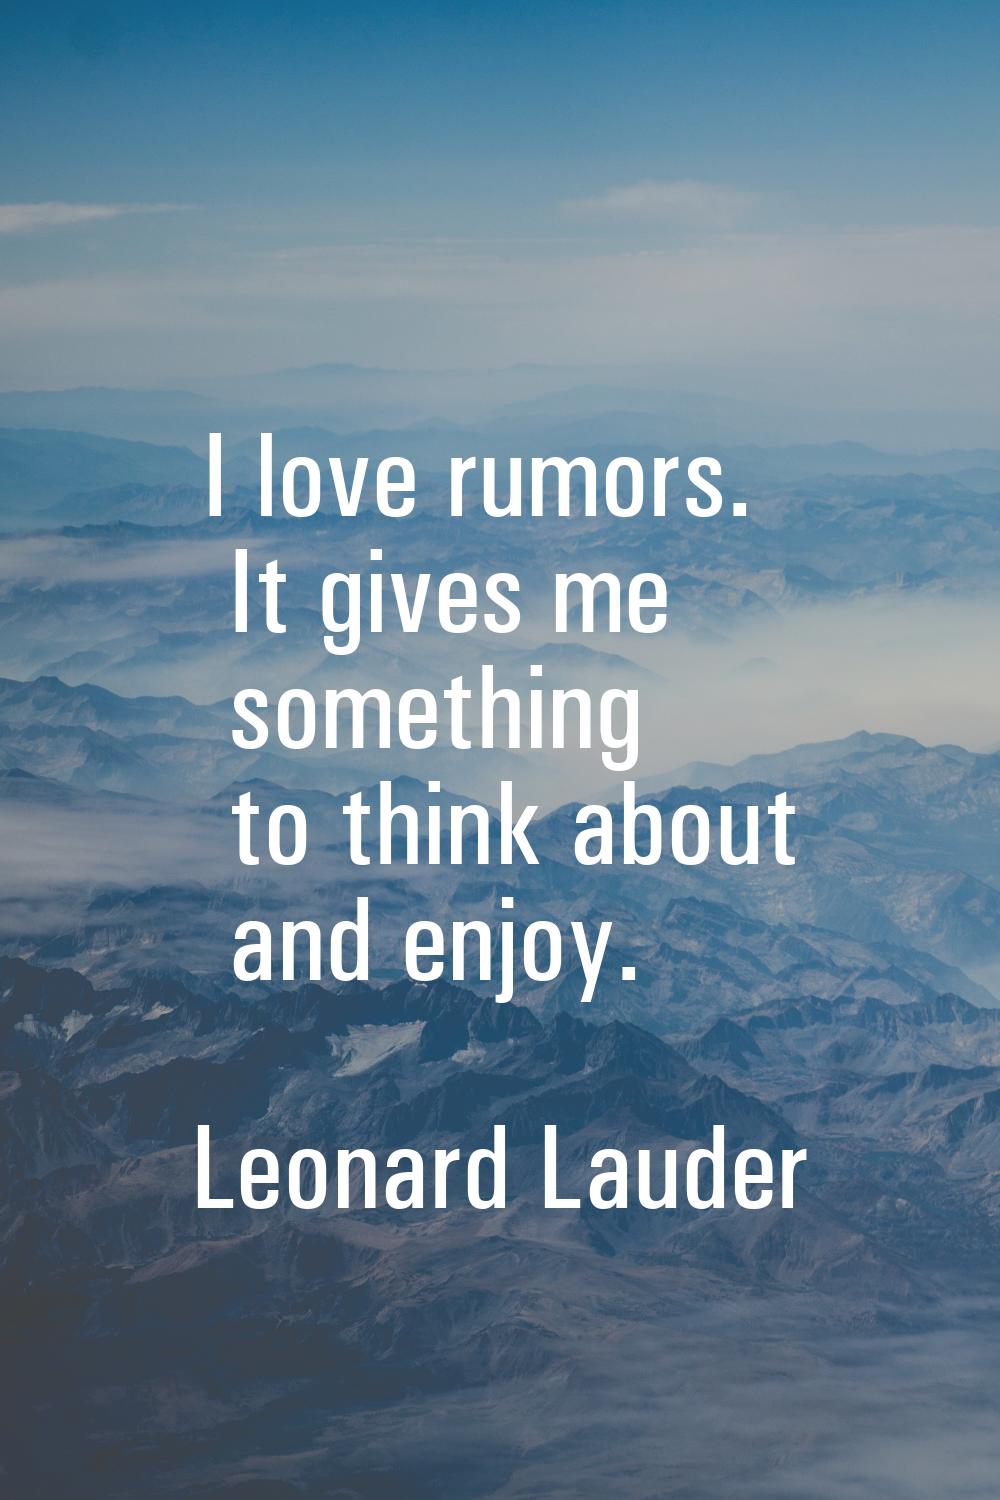 I love rumors. It gives me something to think about and enjoy.